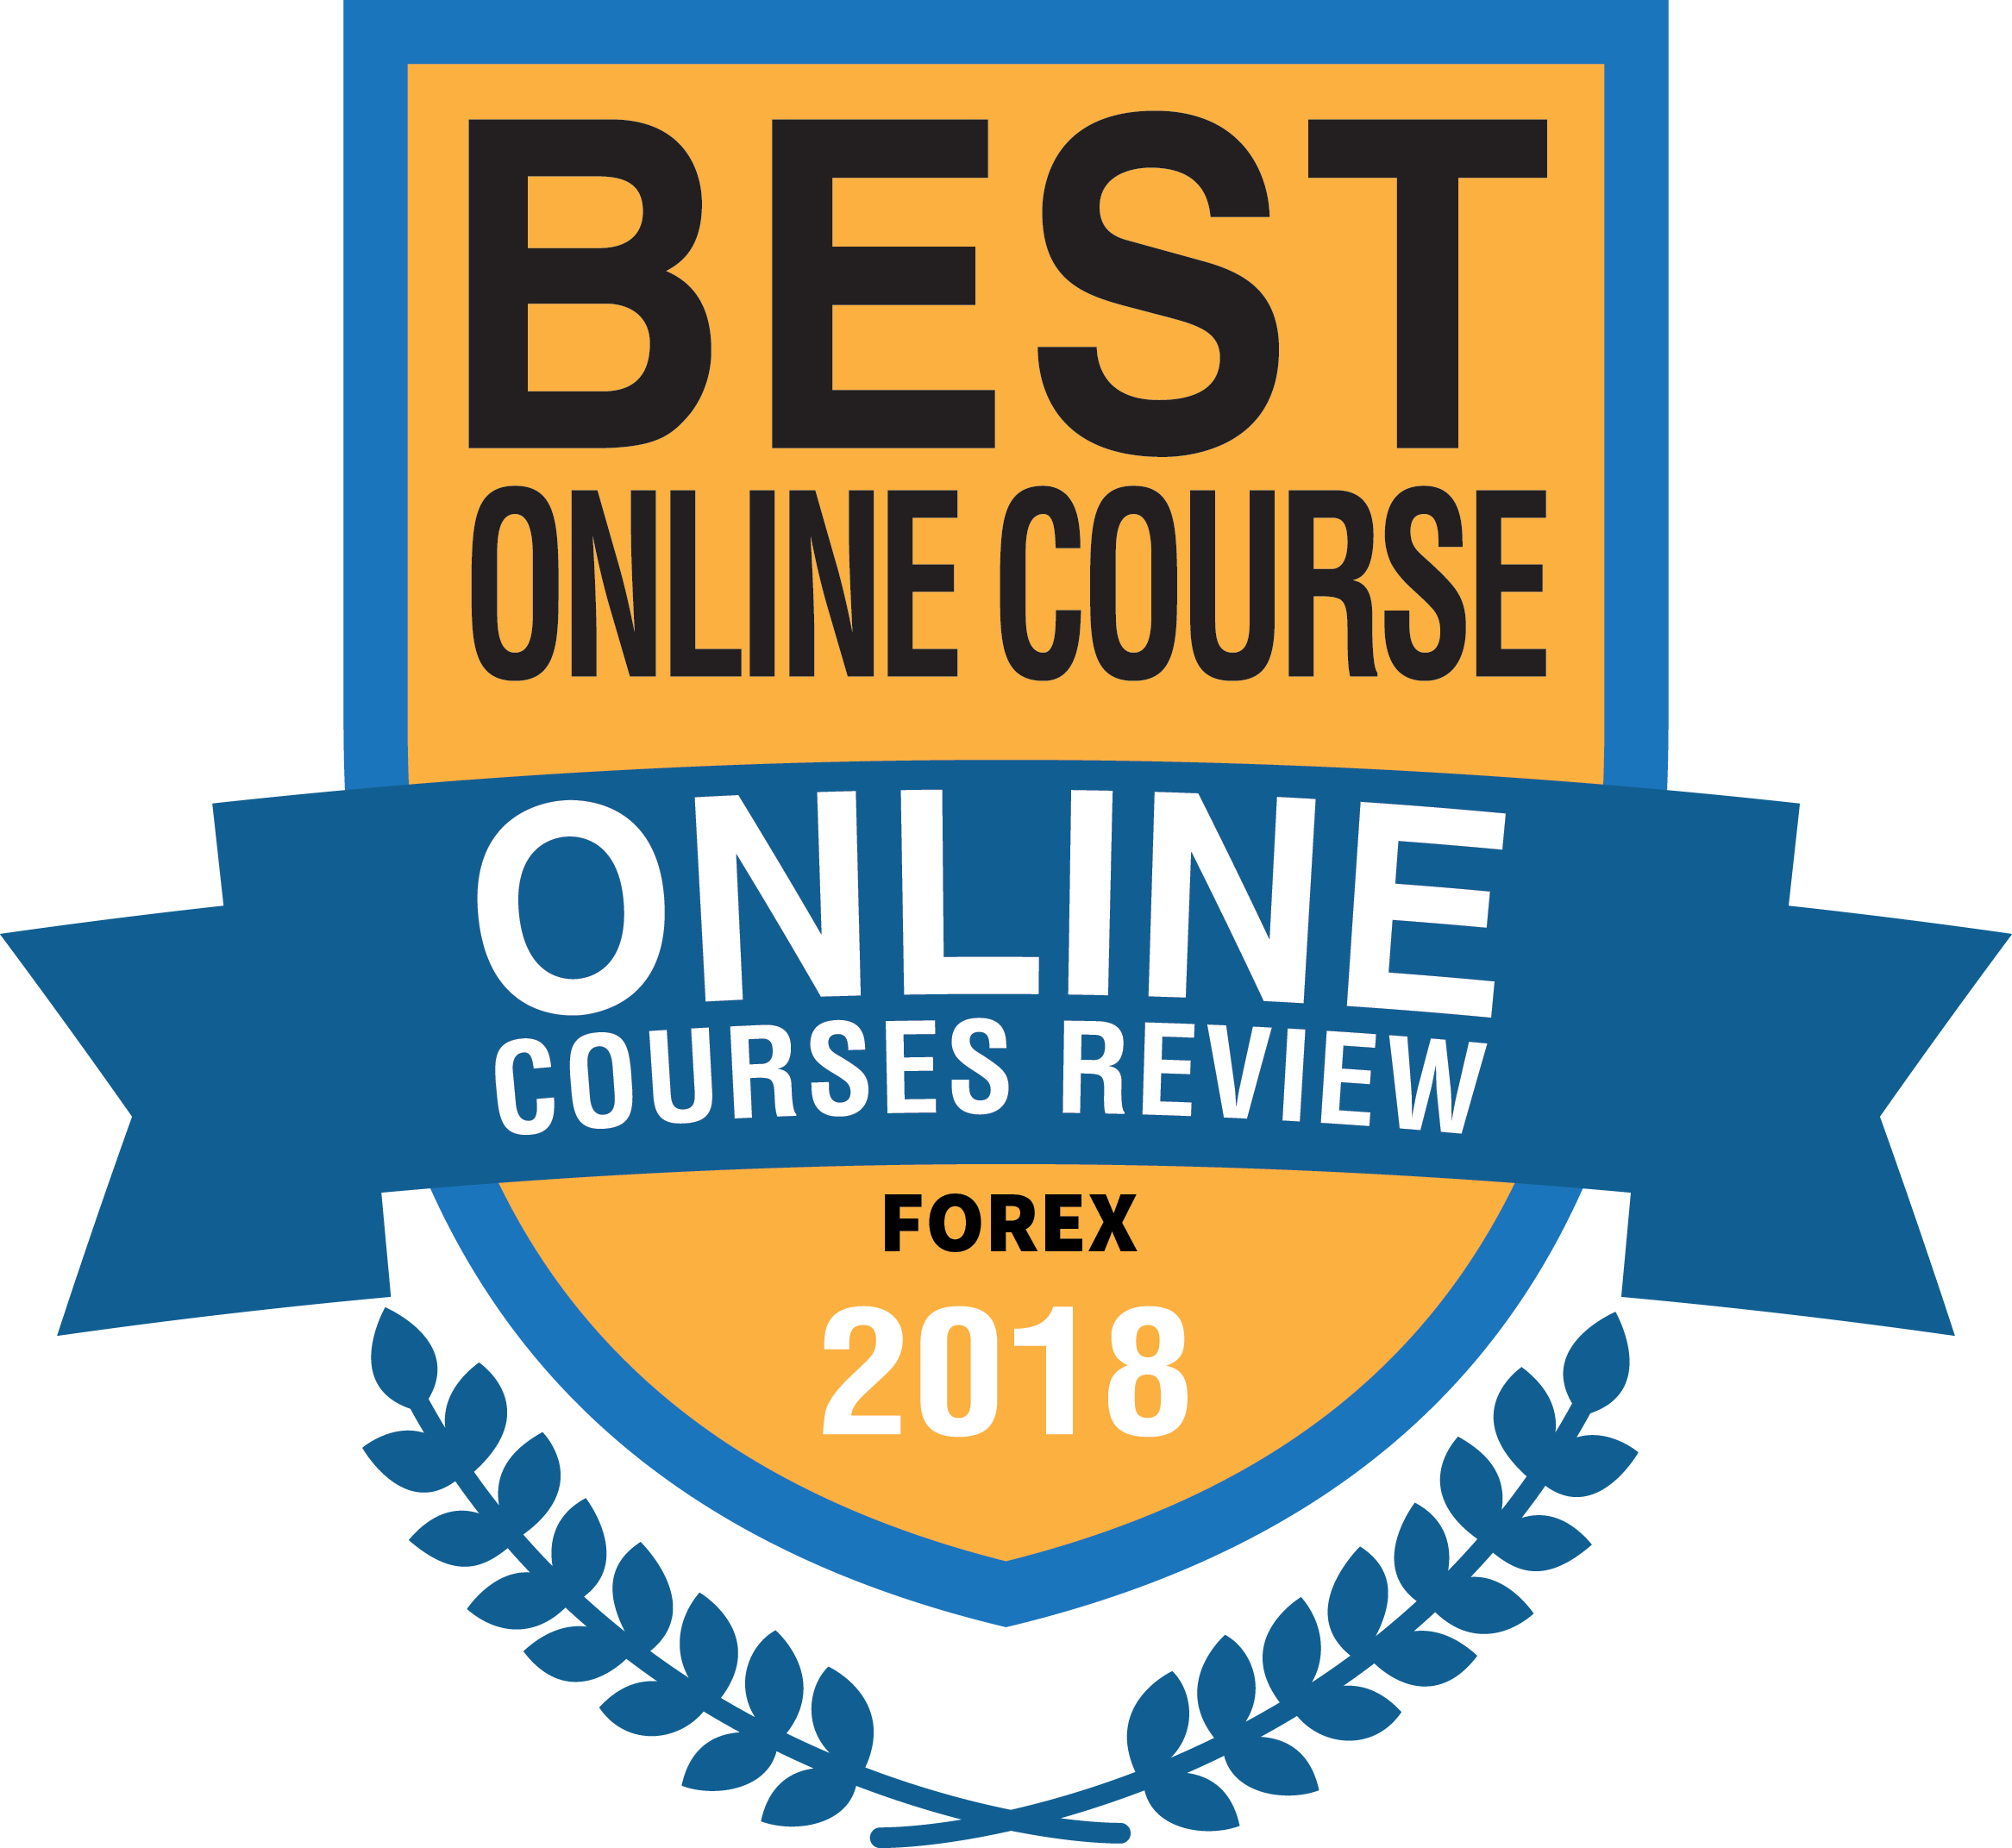 Forex degree courses